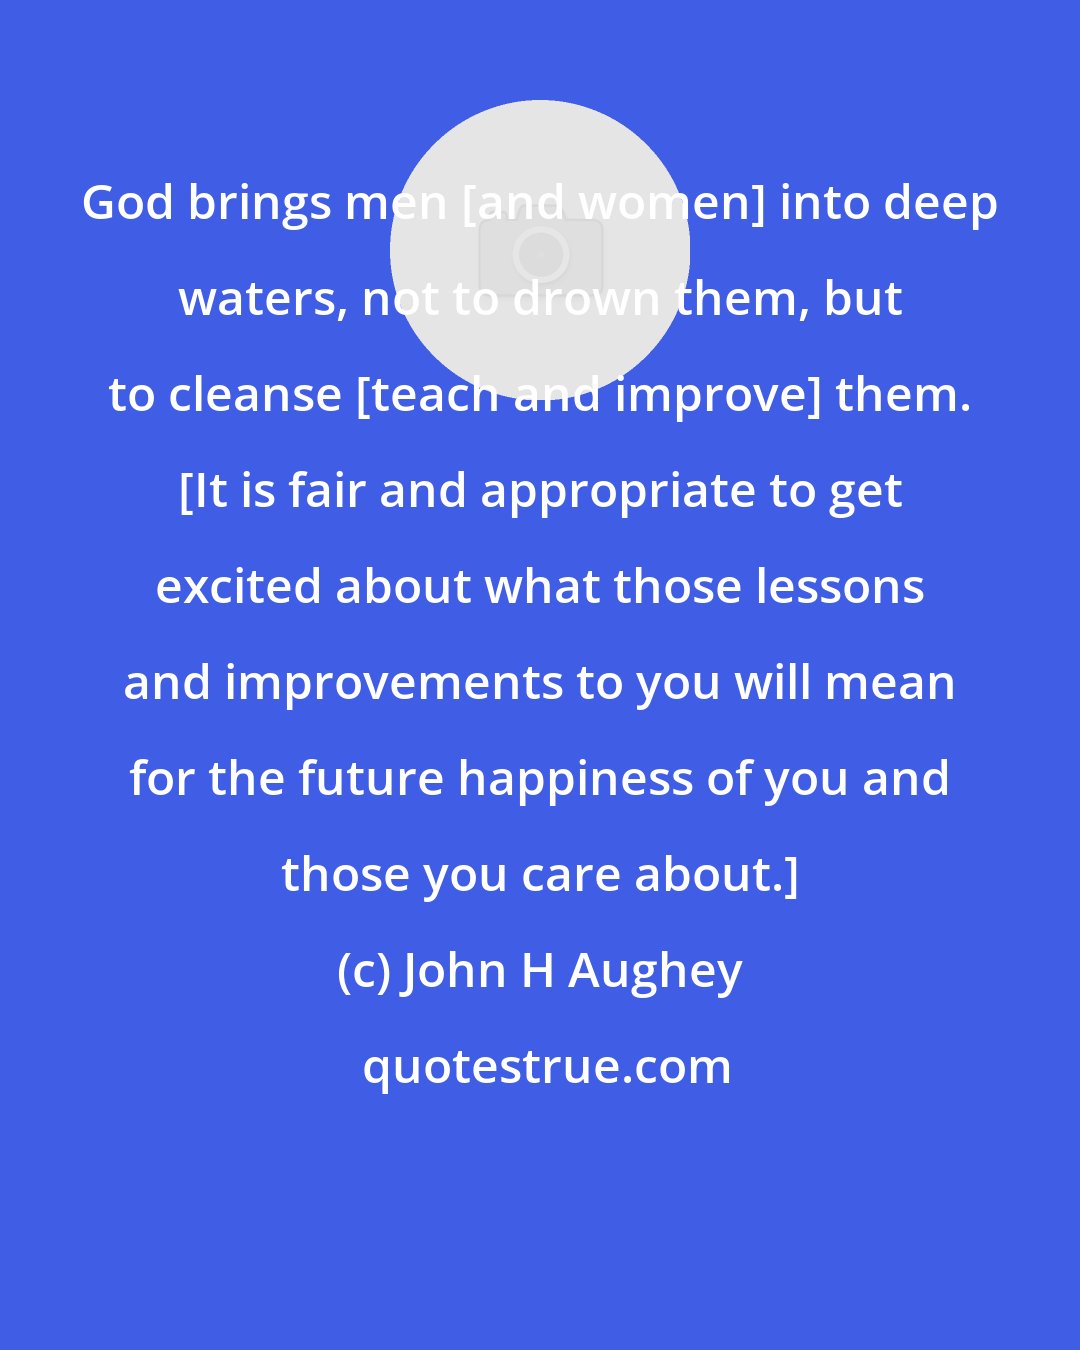 John H Aughey: God brings men [and women] into deep waters, not to drown them, but to cleanse [teach and improve] them. [It is fair and appropriate to get excited about what those lessons and improvements to you will mean for the future happiness of you and those you care about.]